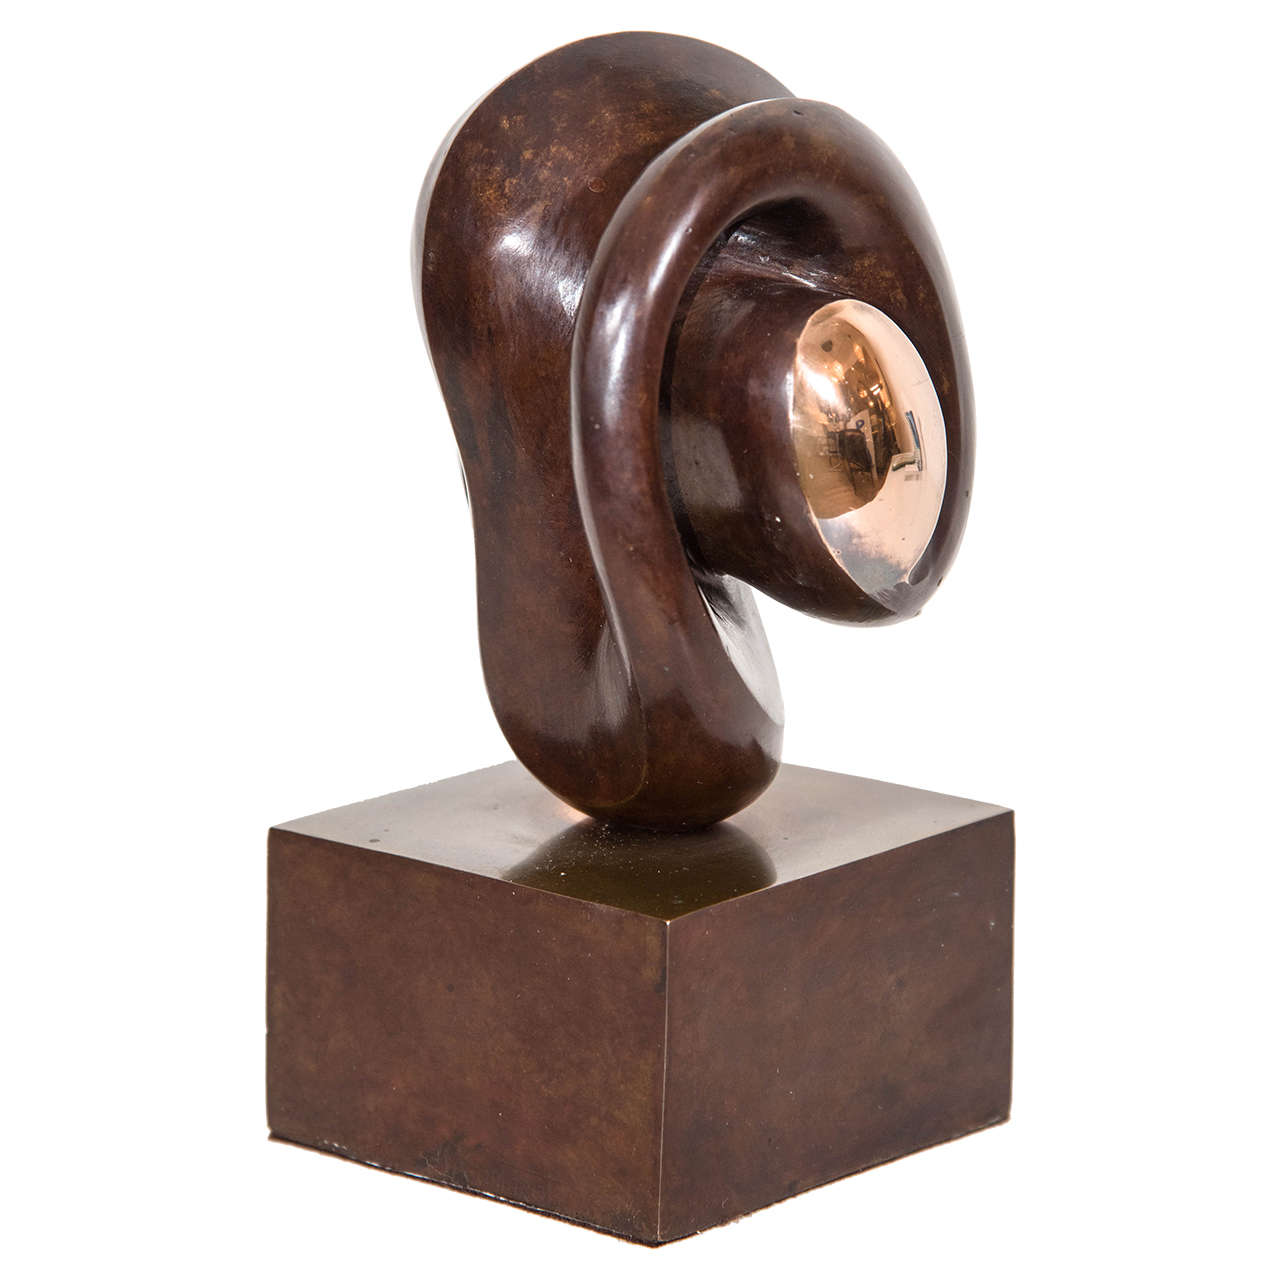 Patinated Bronze Sculpture by Canadian Sculpture Maryon Kanteroff